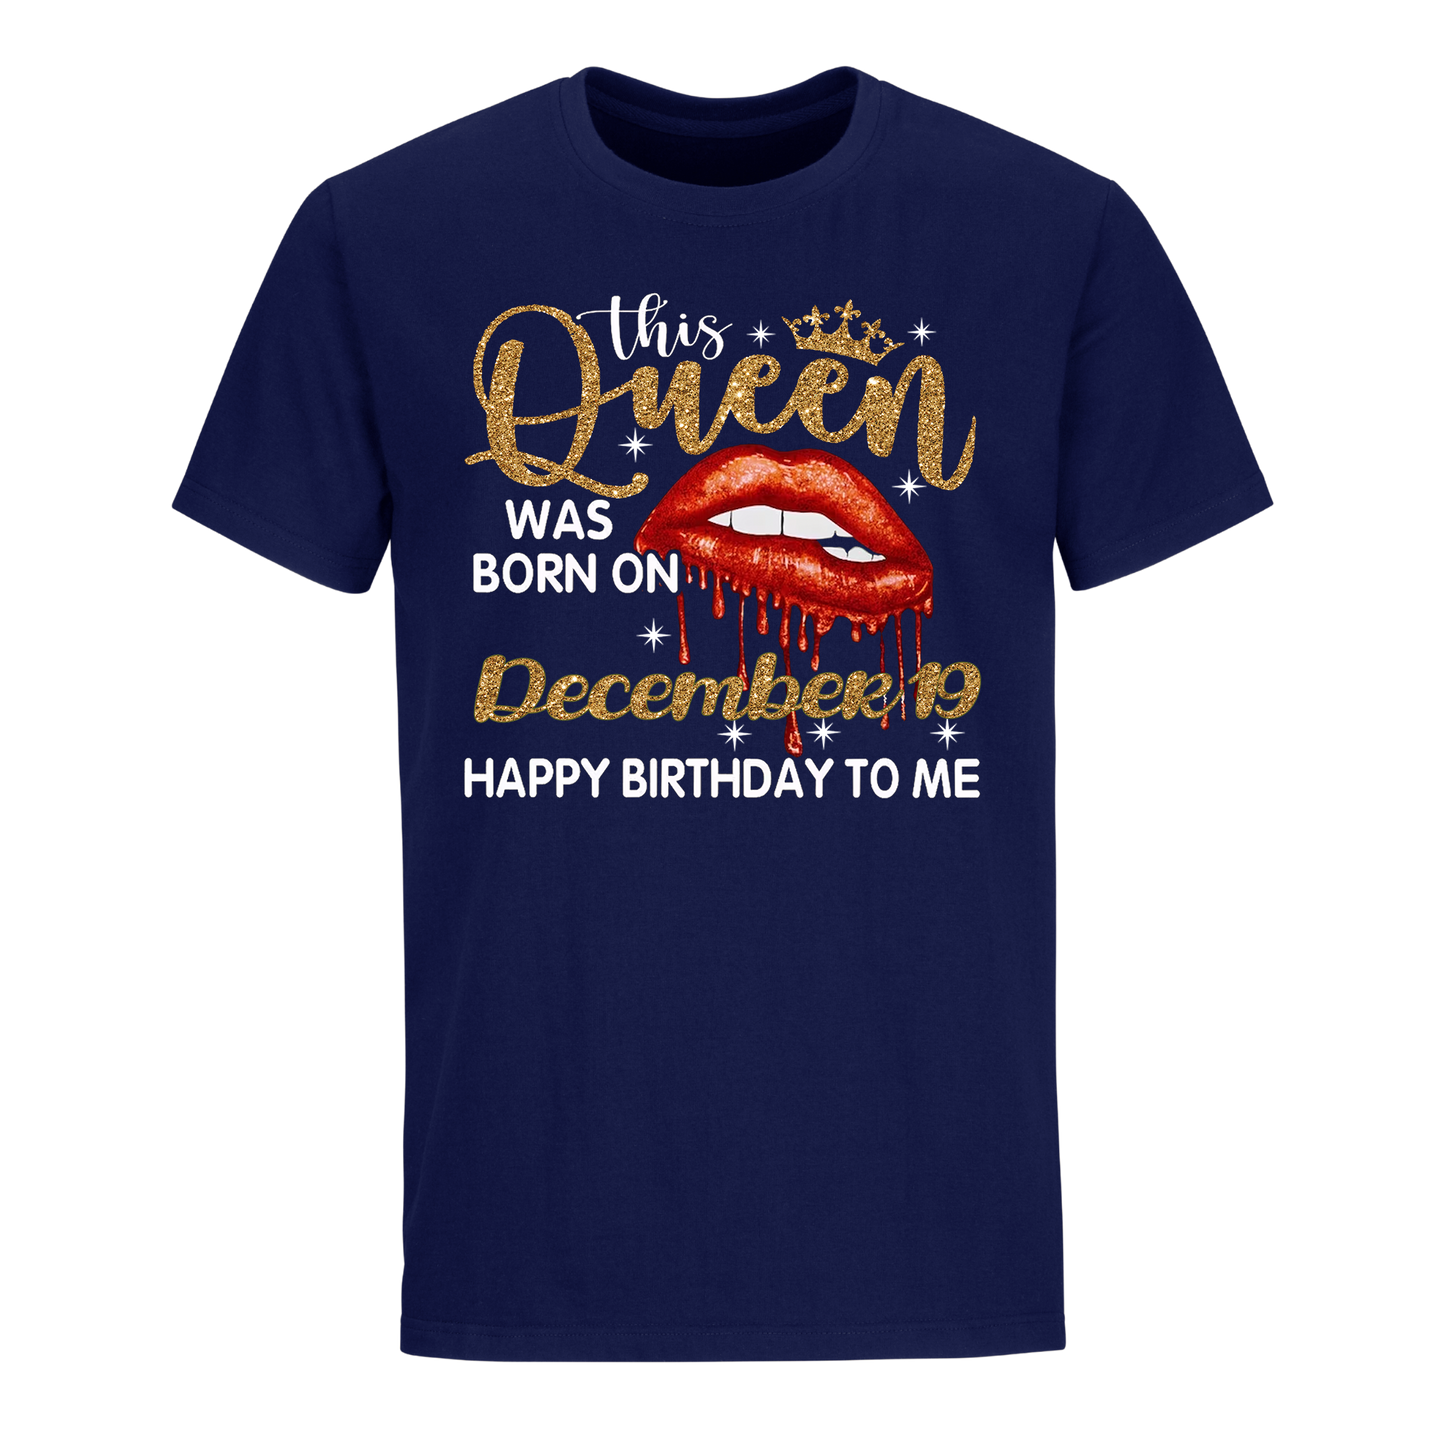 THIS QUEEN WAS BORN ON DECEMBER 19 UNISEX SHIRT